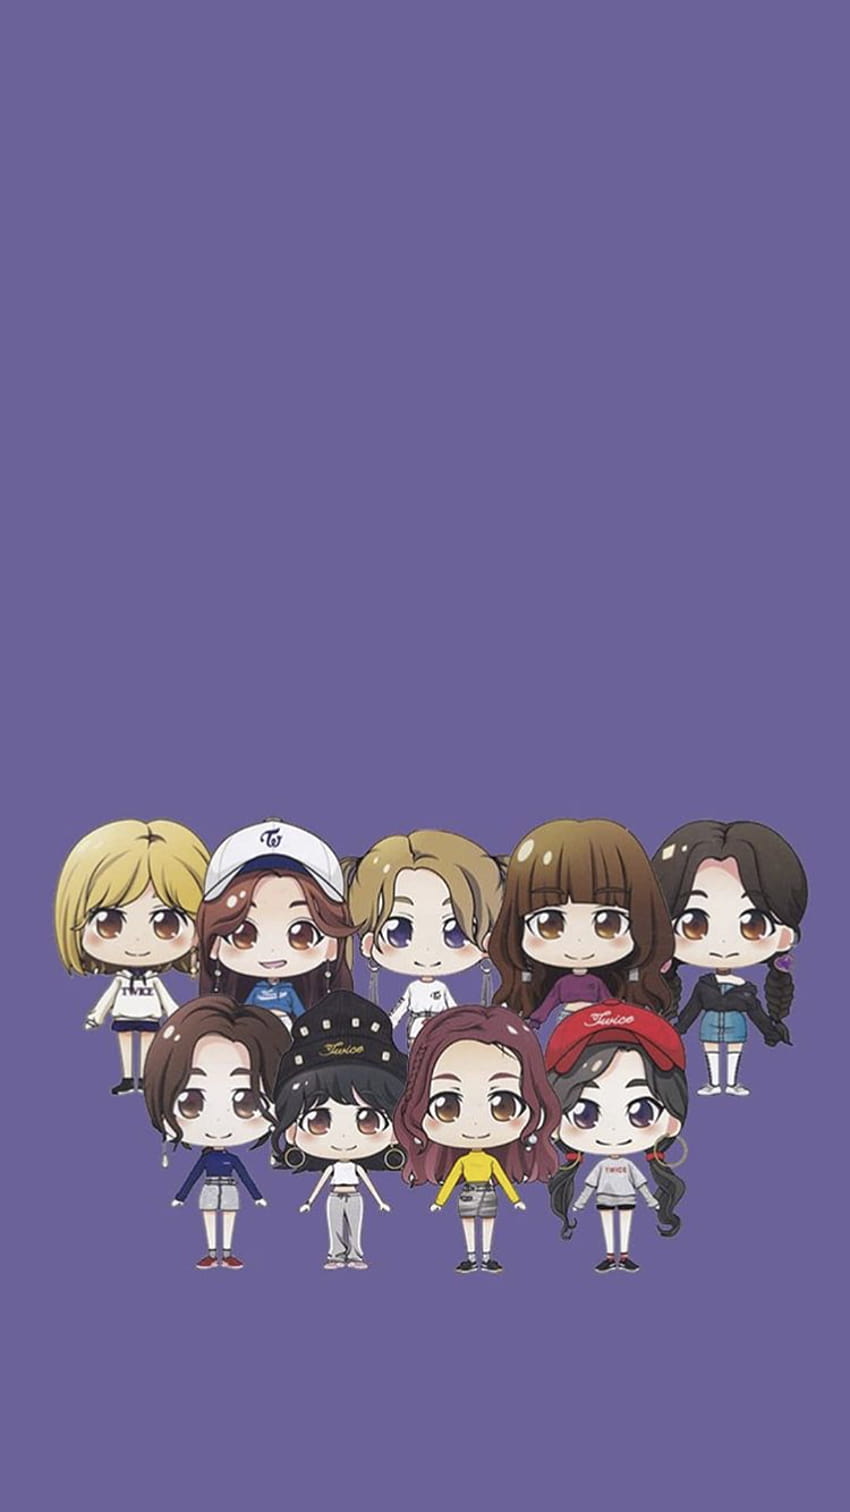 Twice Anime Wallpapers - Wallpaper Cave